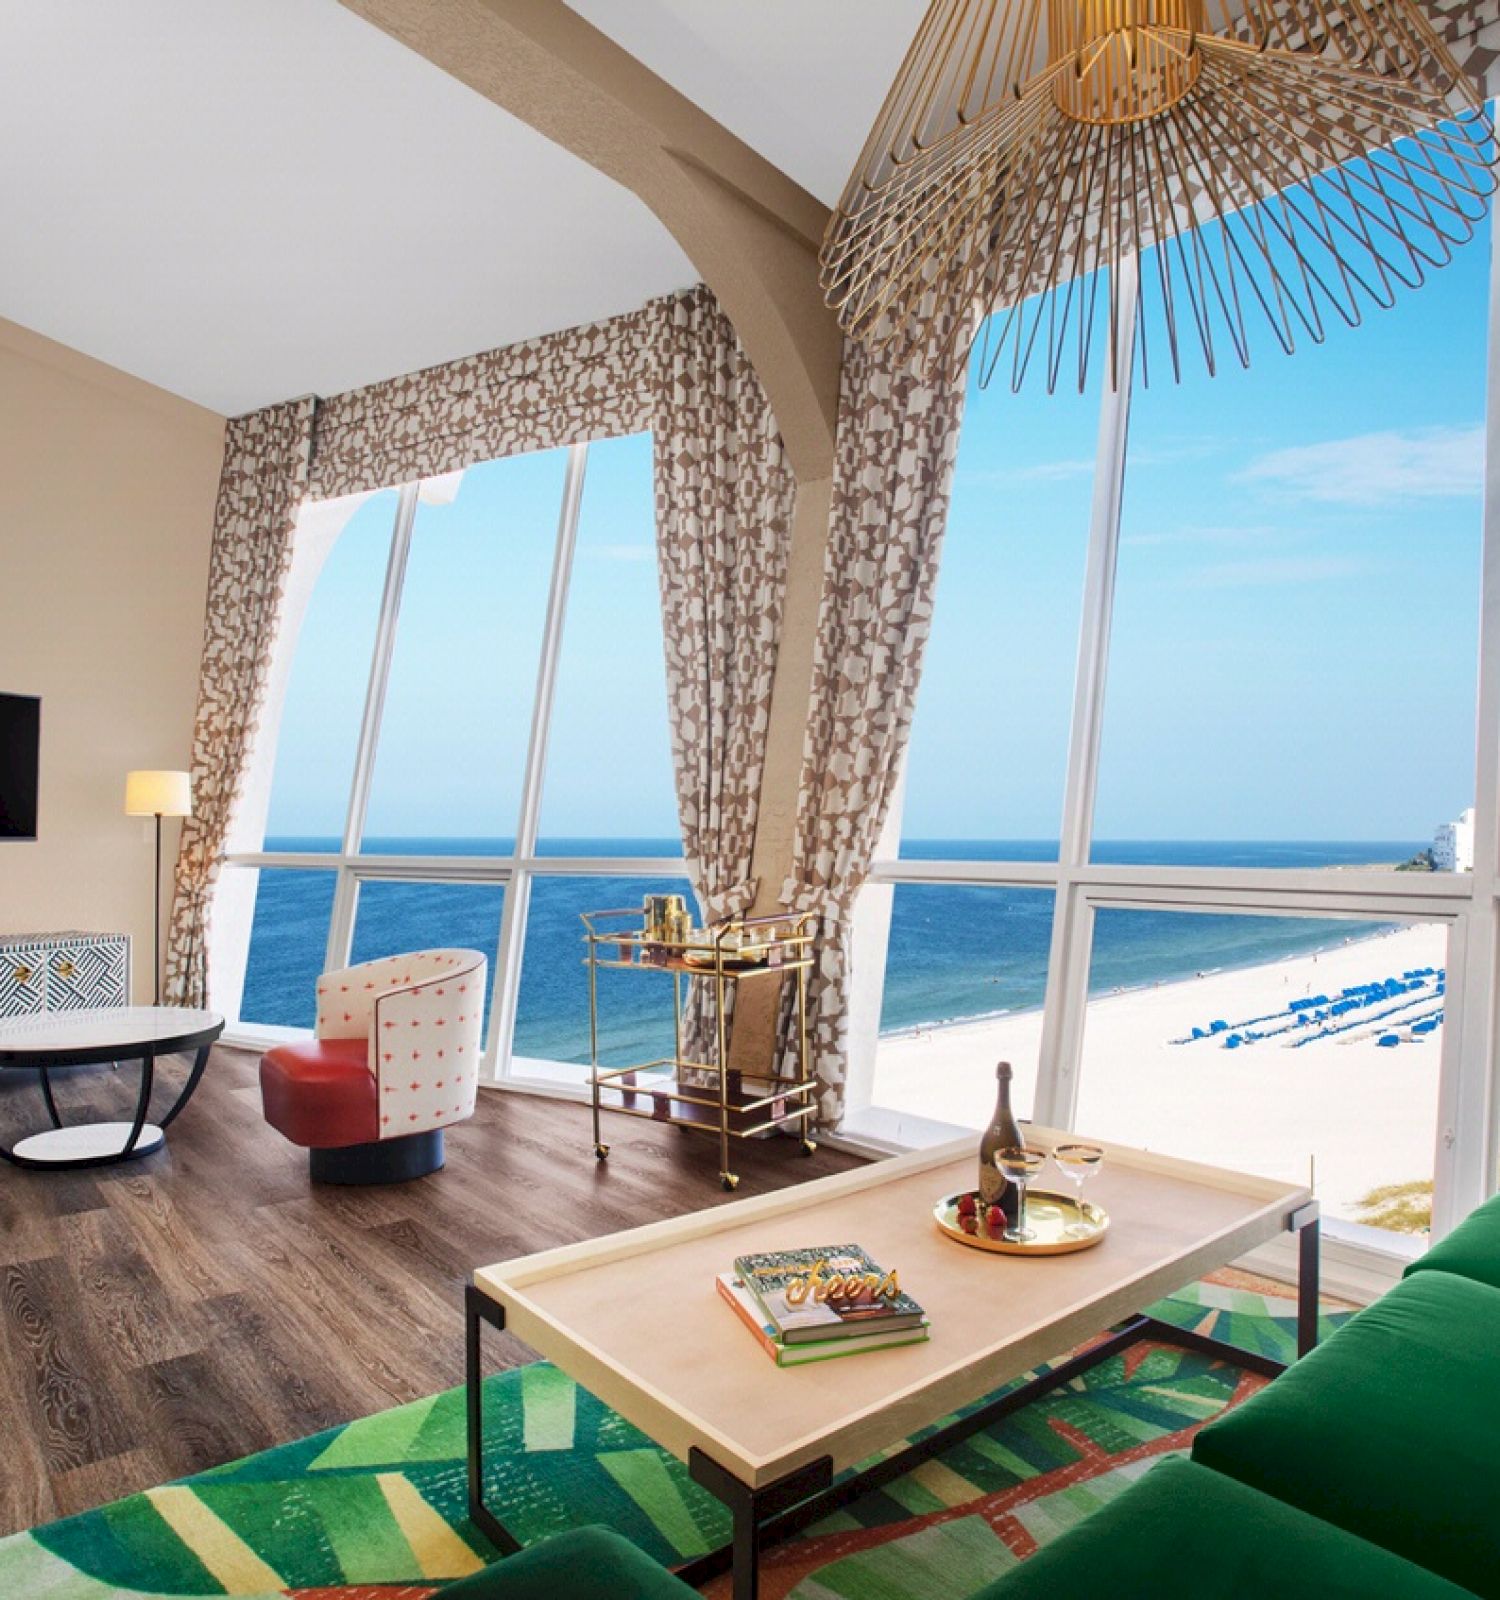 A beachfront room with a sofa, table, TV, large windows, and a seaside view.